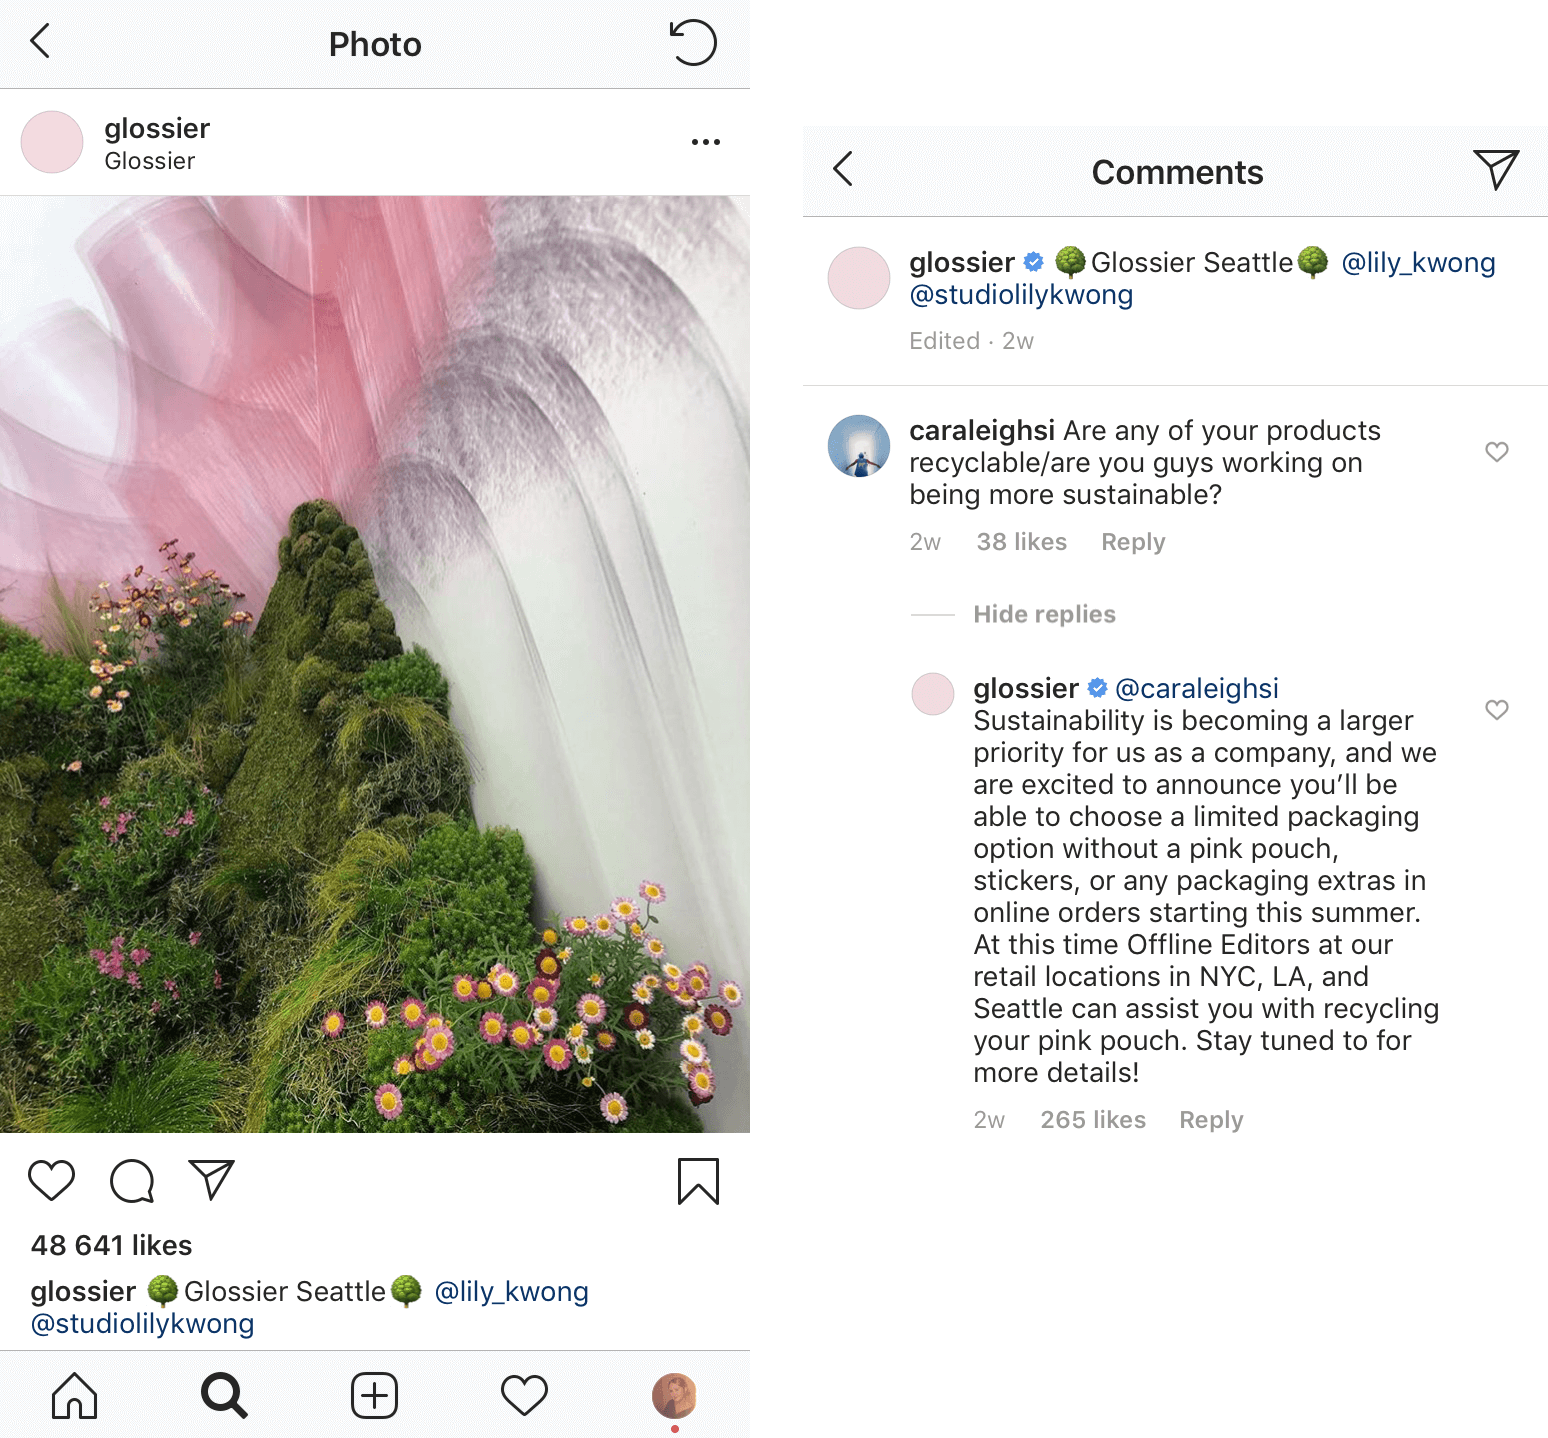 moderating comments on Instagram